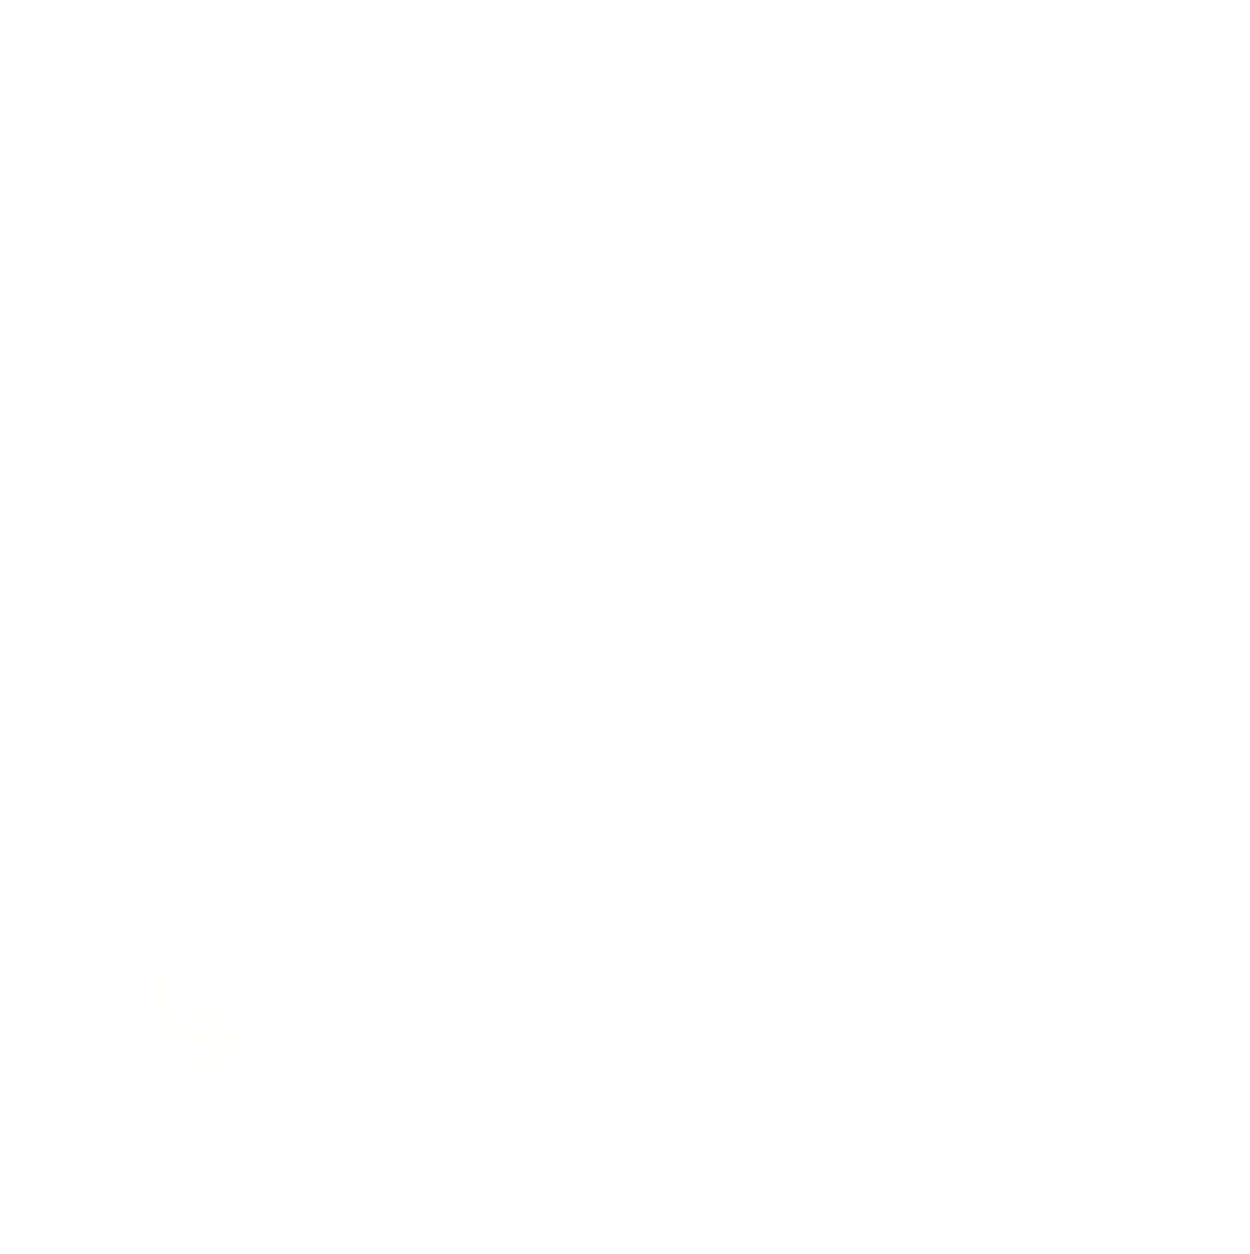 Greater Data Science Cooperative Institute - a collaboration between the University of Rochester and Cornell University